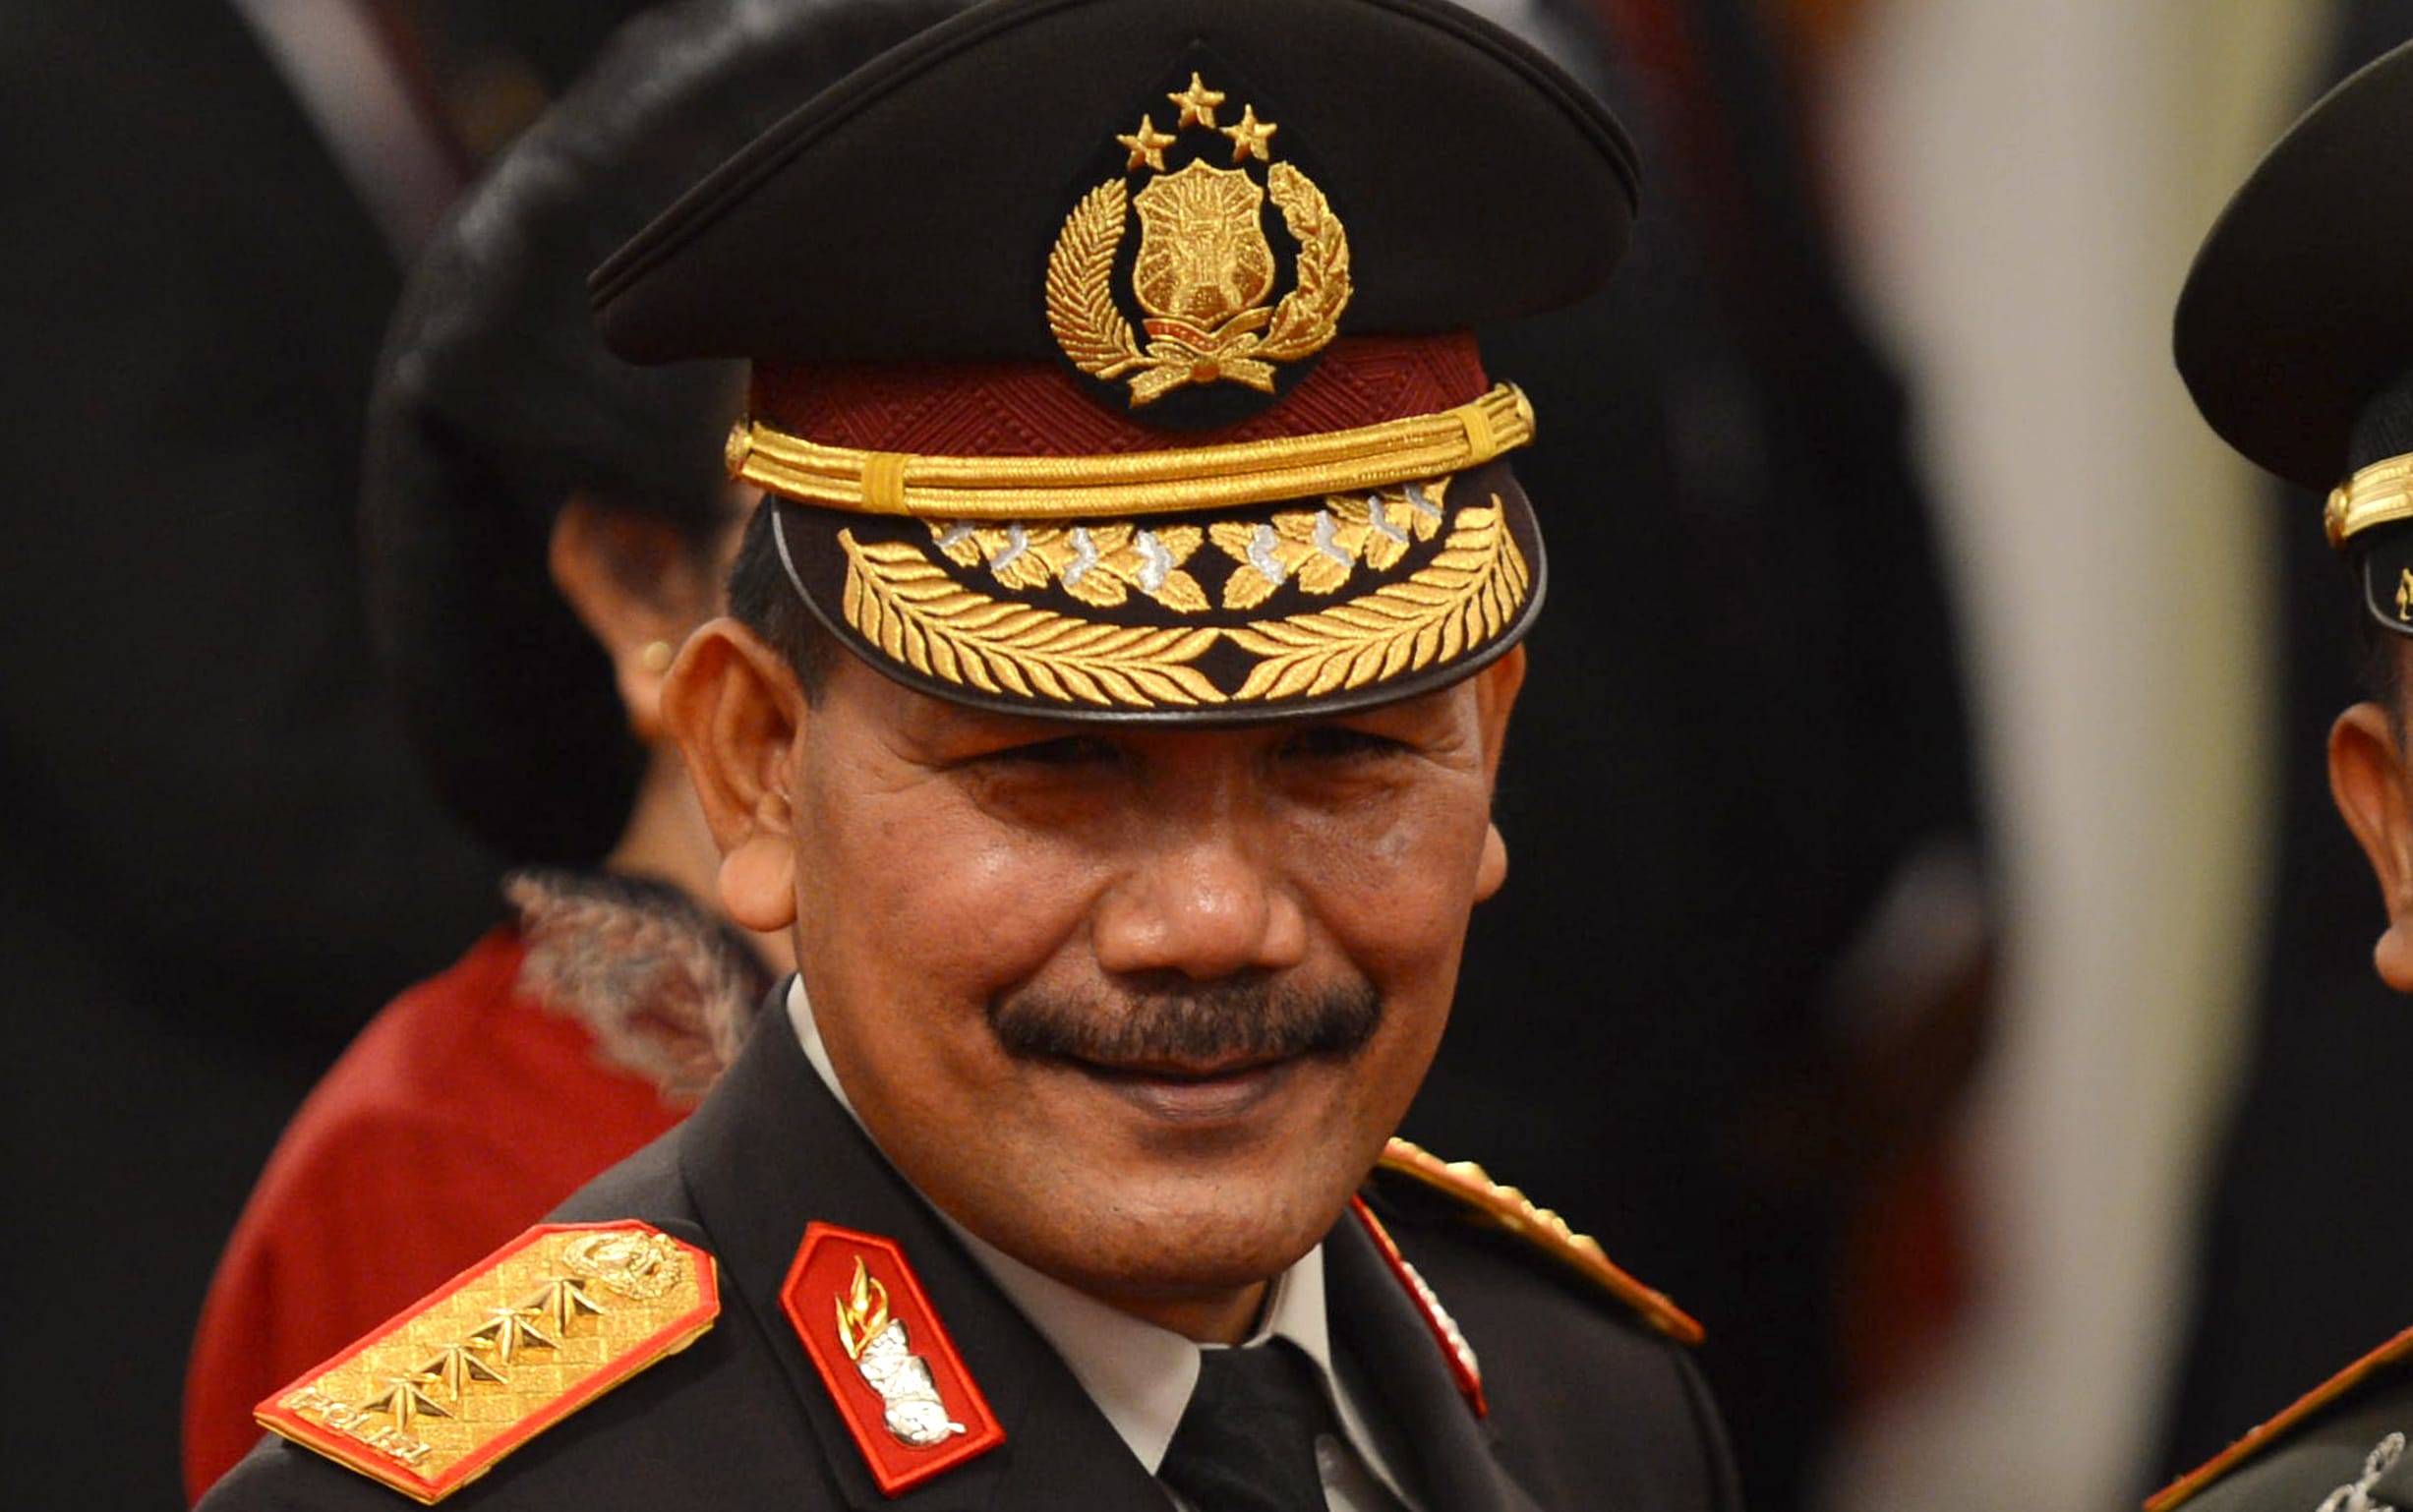 Indonesia's new national police chief, Police General Badrodin Haiti